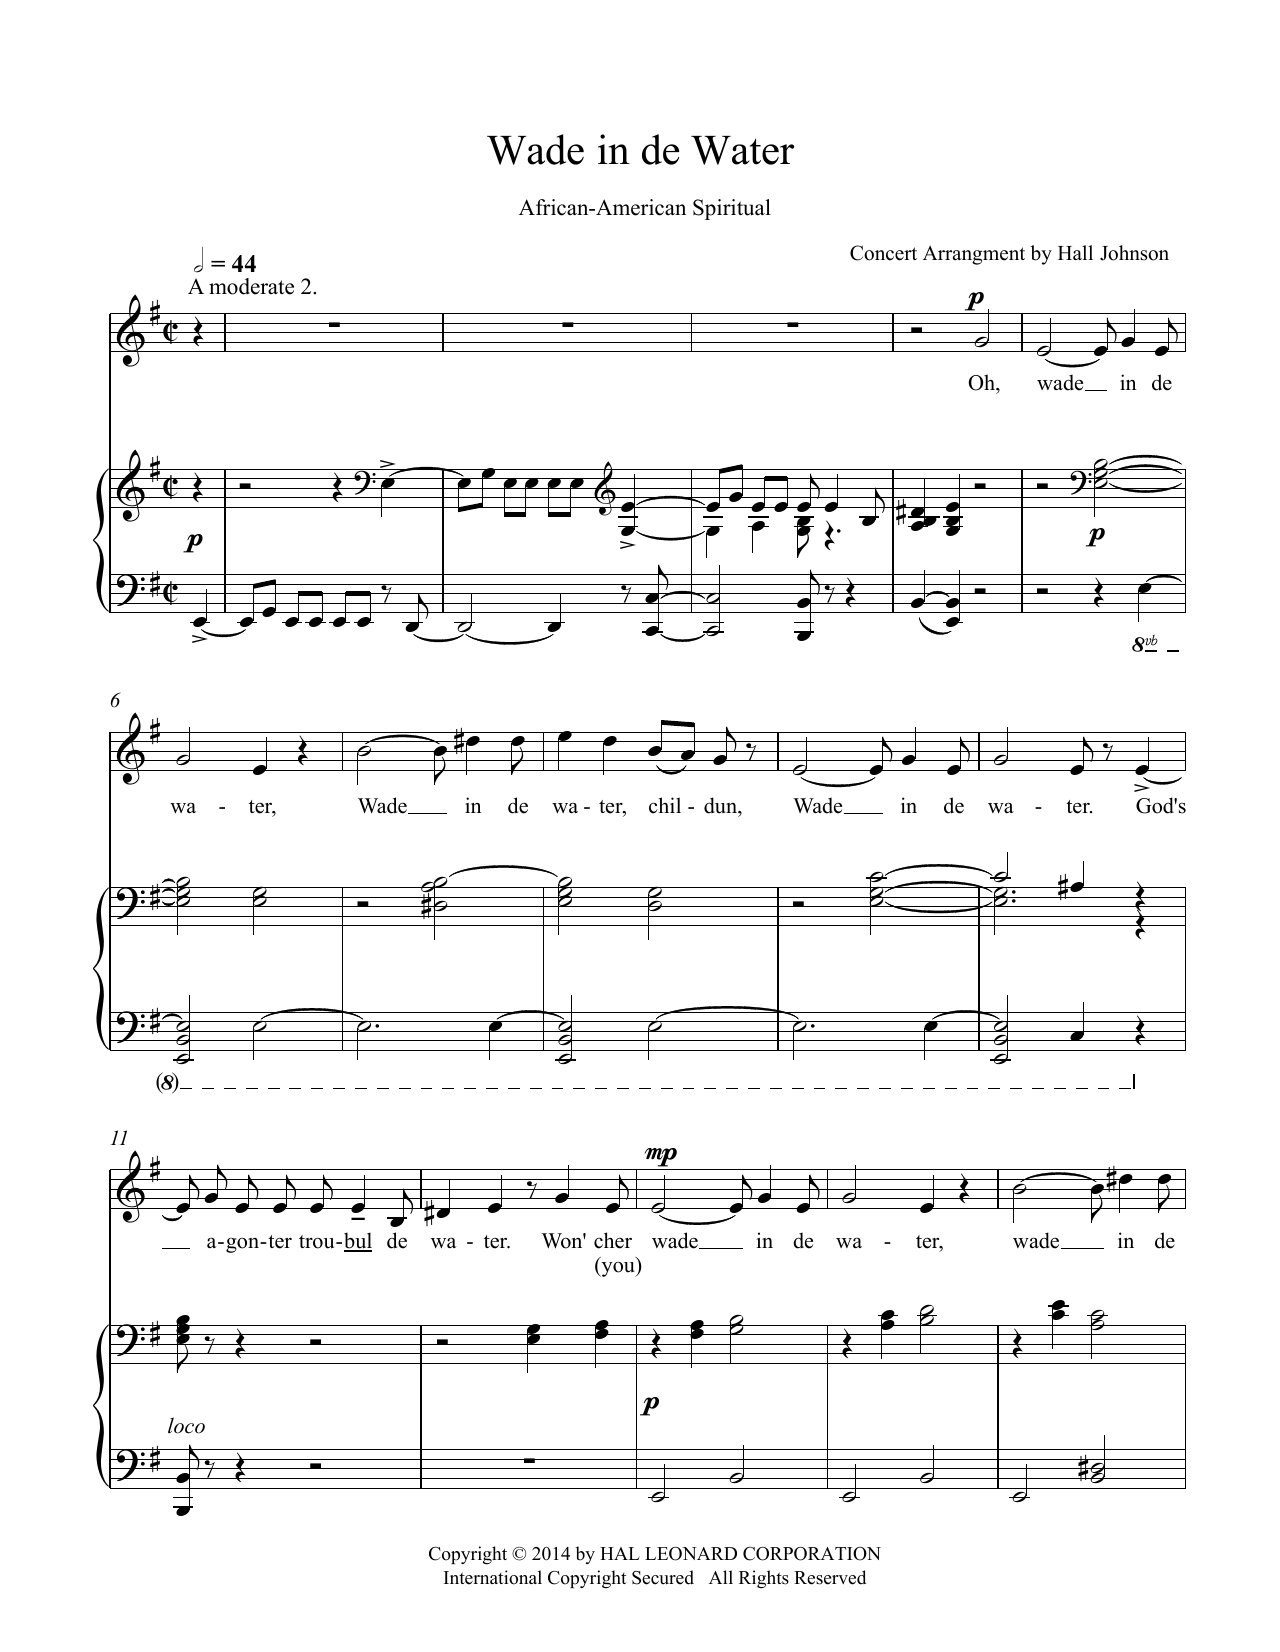 Hall Johnson Wade in de Water (E minor) sheet music notes and chords. Download Printable PDF.